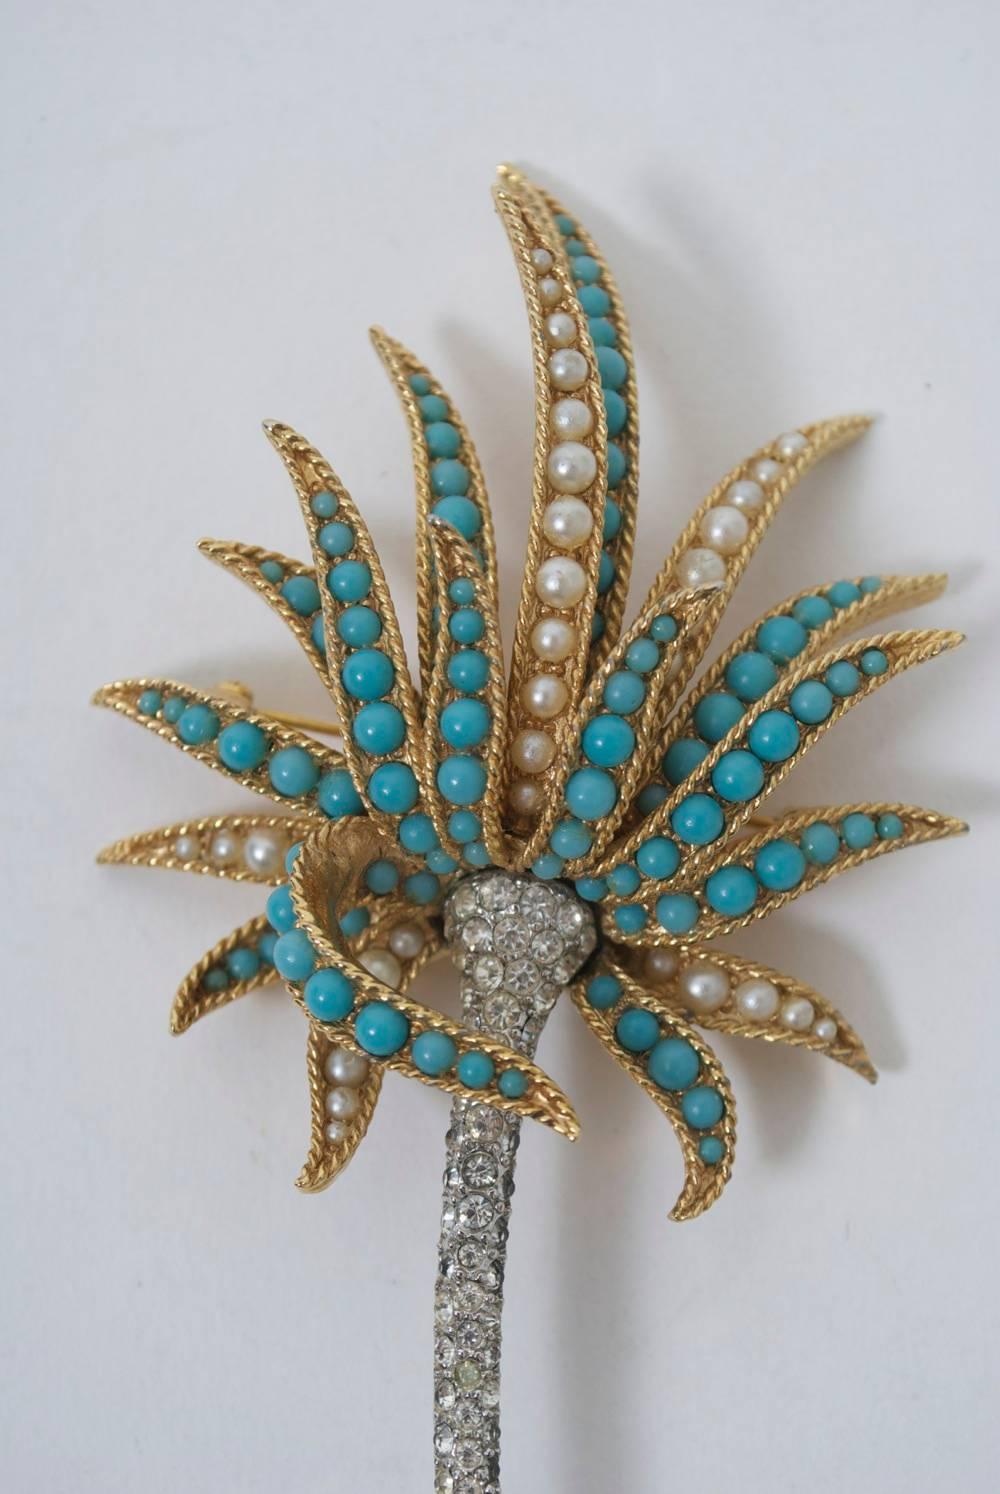 Boucher mid-twentieth century brooch in the shape of a palm, the slender stem composed of rhinestones and the fronds of turquoise stones or pearls. The three-dimensional setting is in gold tone metal with a rope design. Signed and numbered, the